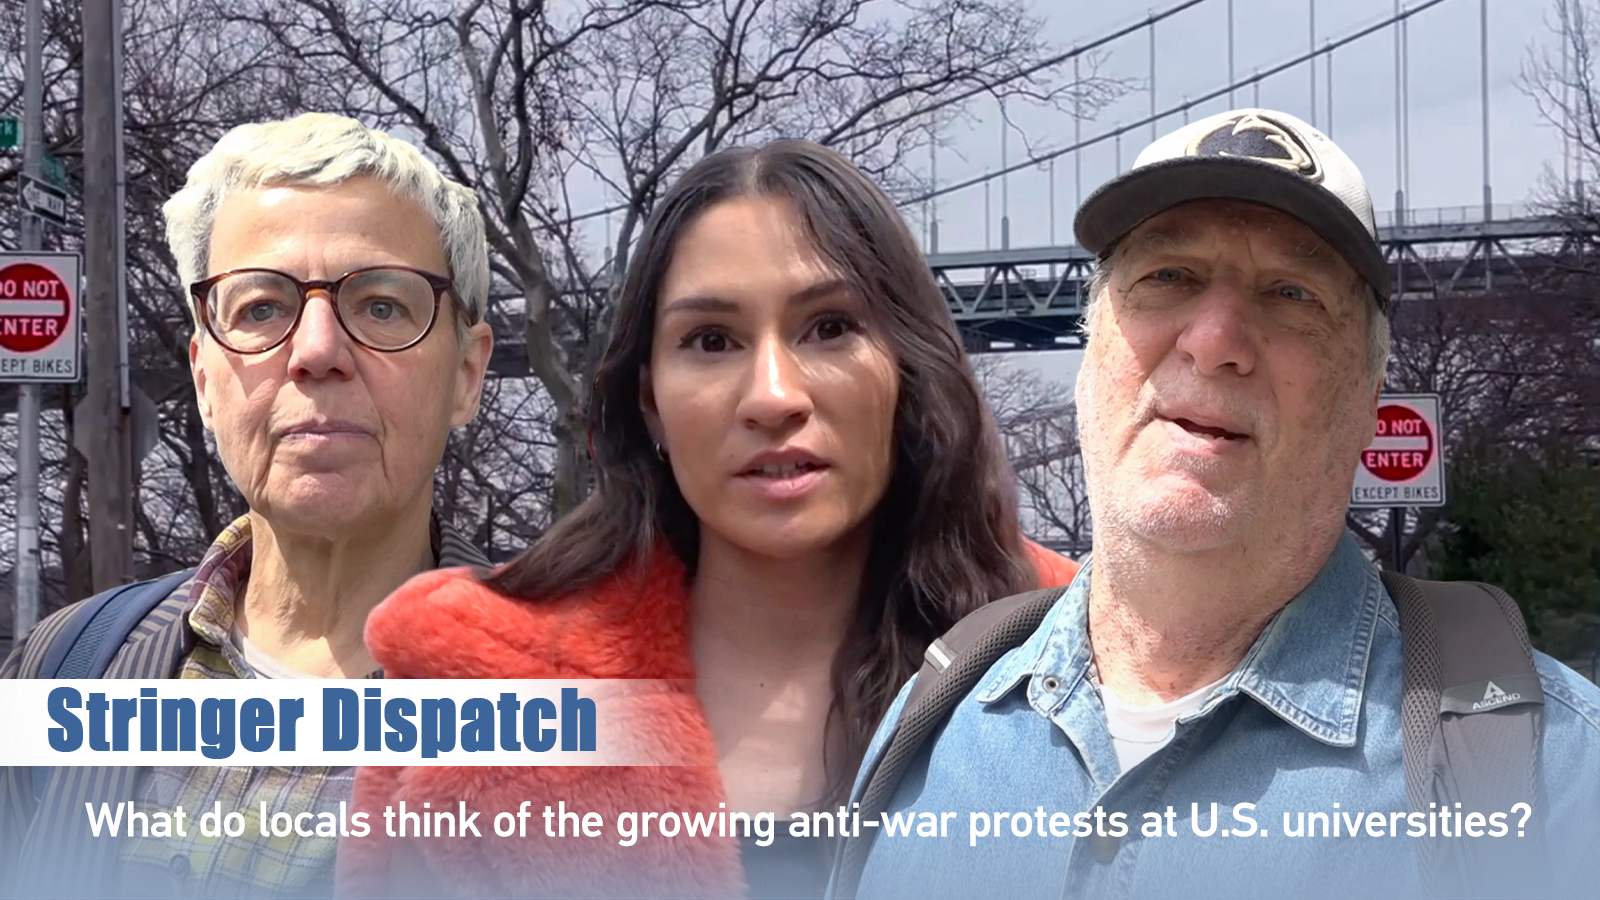 What do locals think of the anti-war protests at U.S. universities?